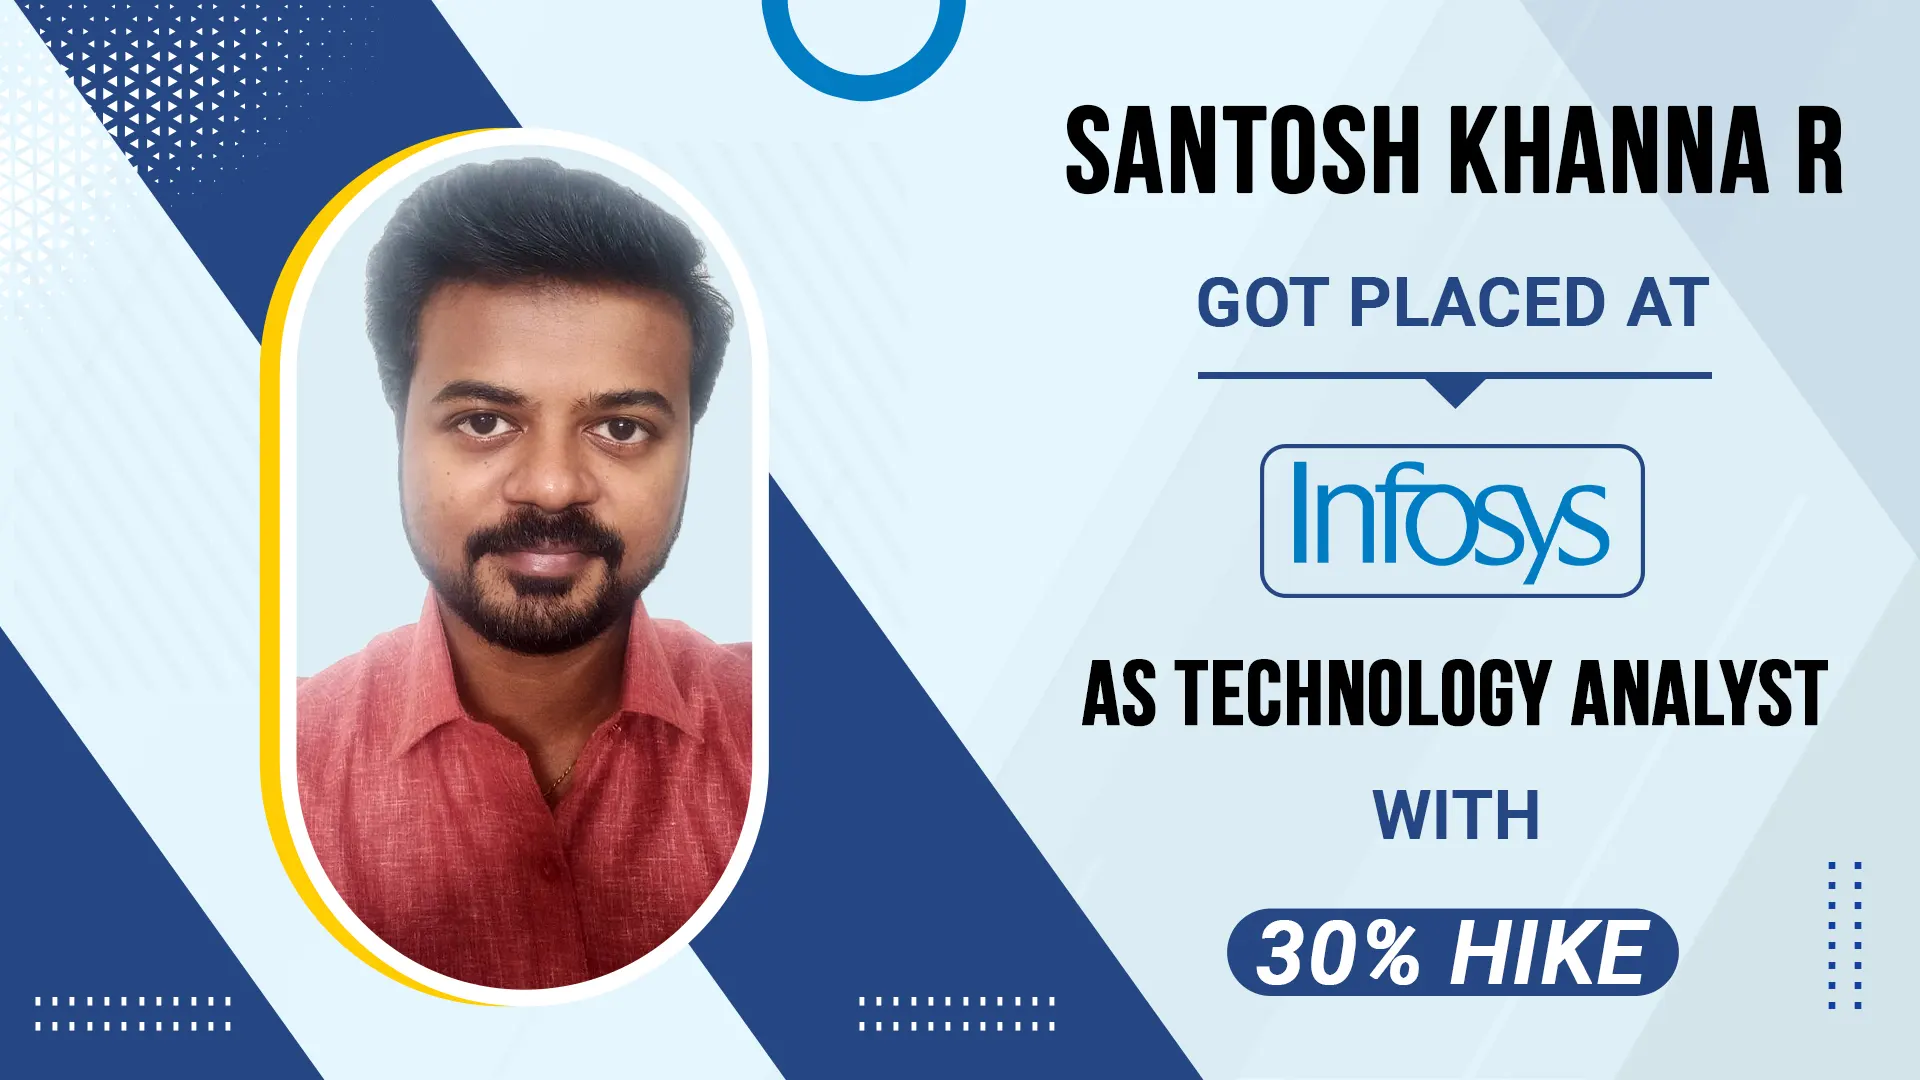 Santosh Khanna R got placed at Infosys as Technology Analyst with 30% Hike